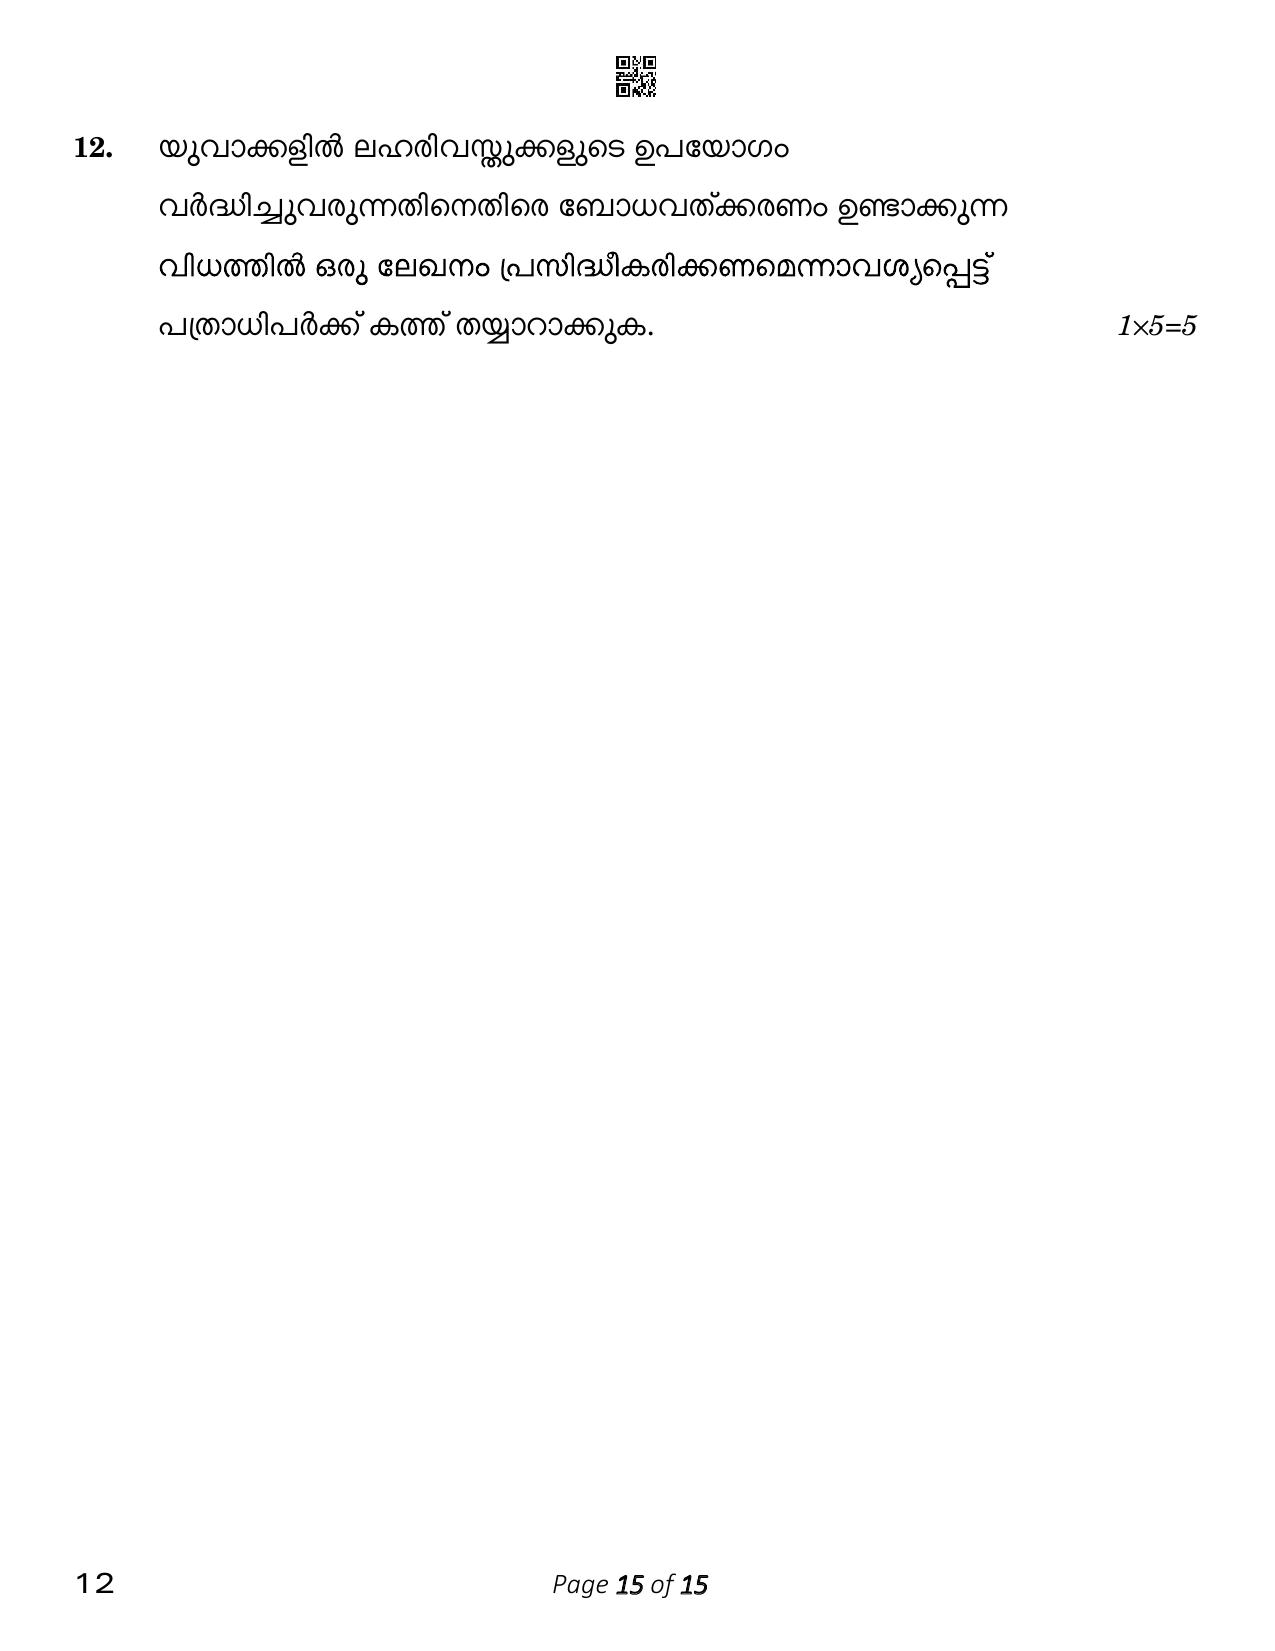 CBSE Class 12 Malayalam (Compartment) 2023 Question Paper - Page 15